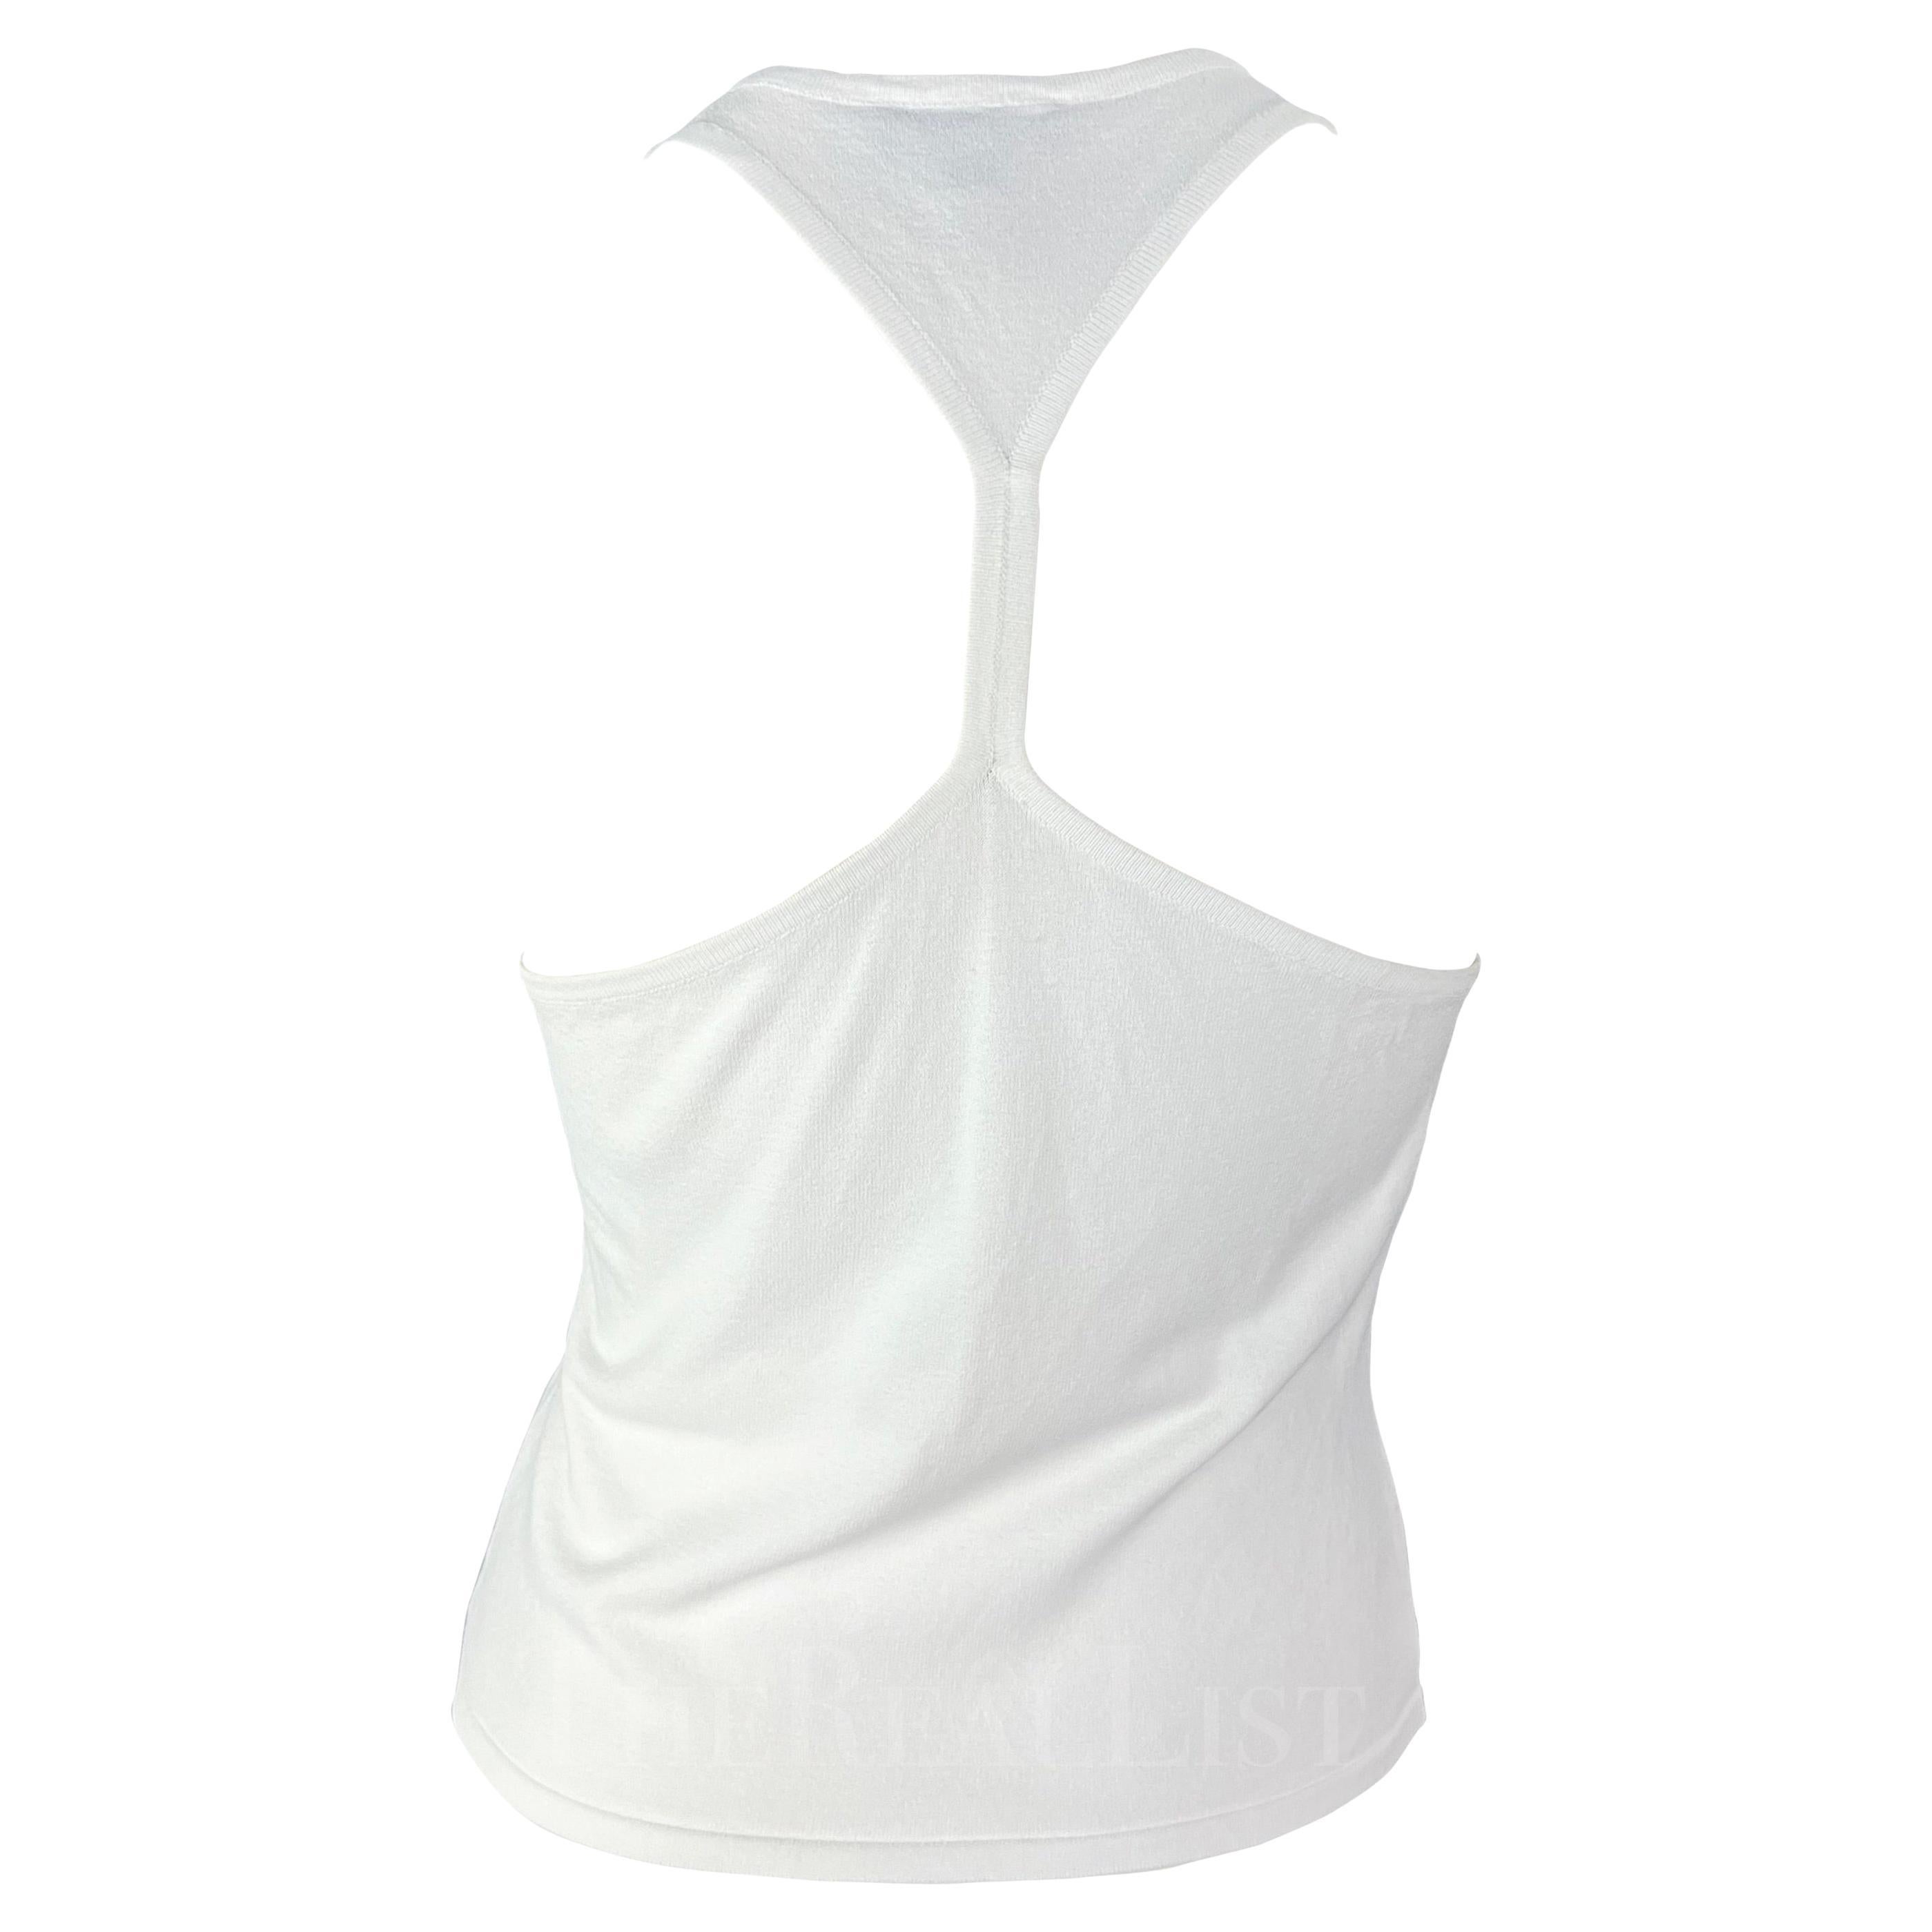 S/S 1998 Gucci by Tom Ford White Stretch Knit Racerback Tank Top For Sale